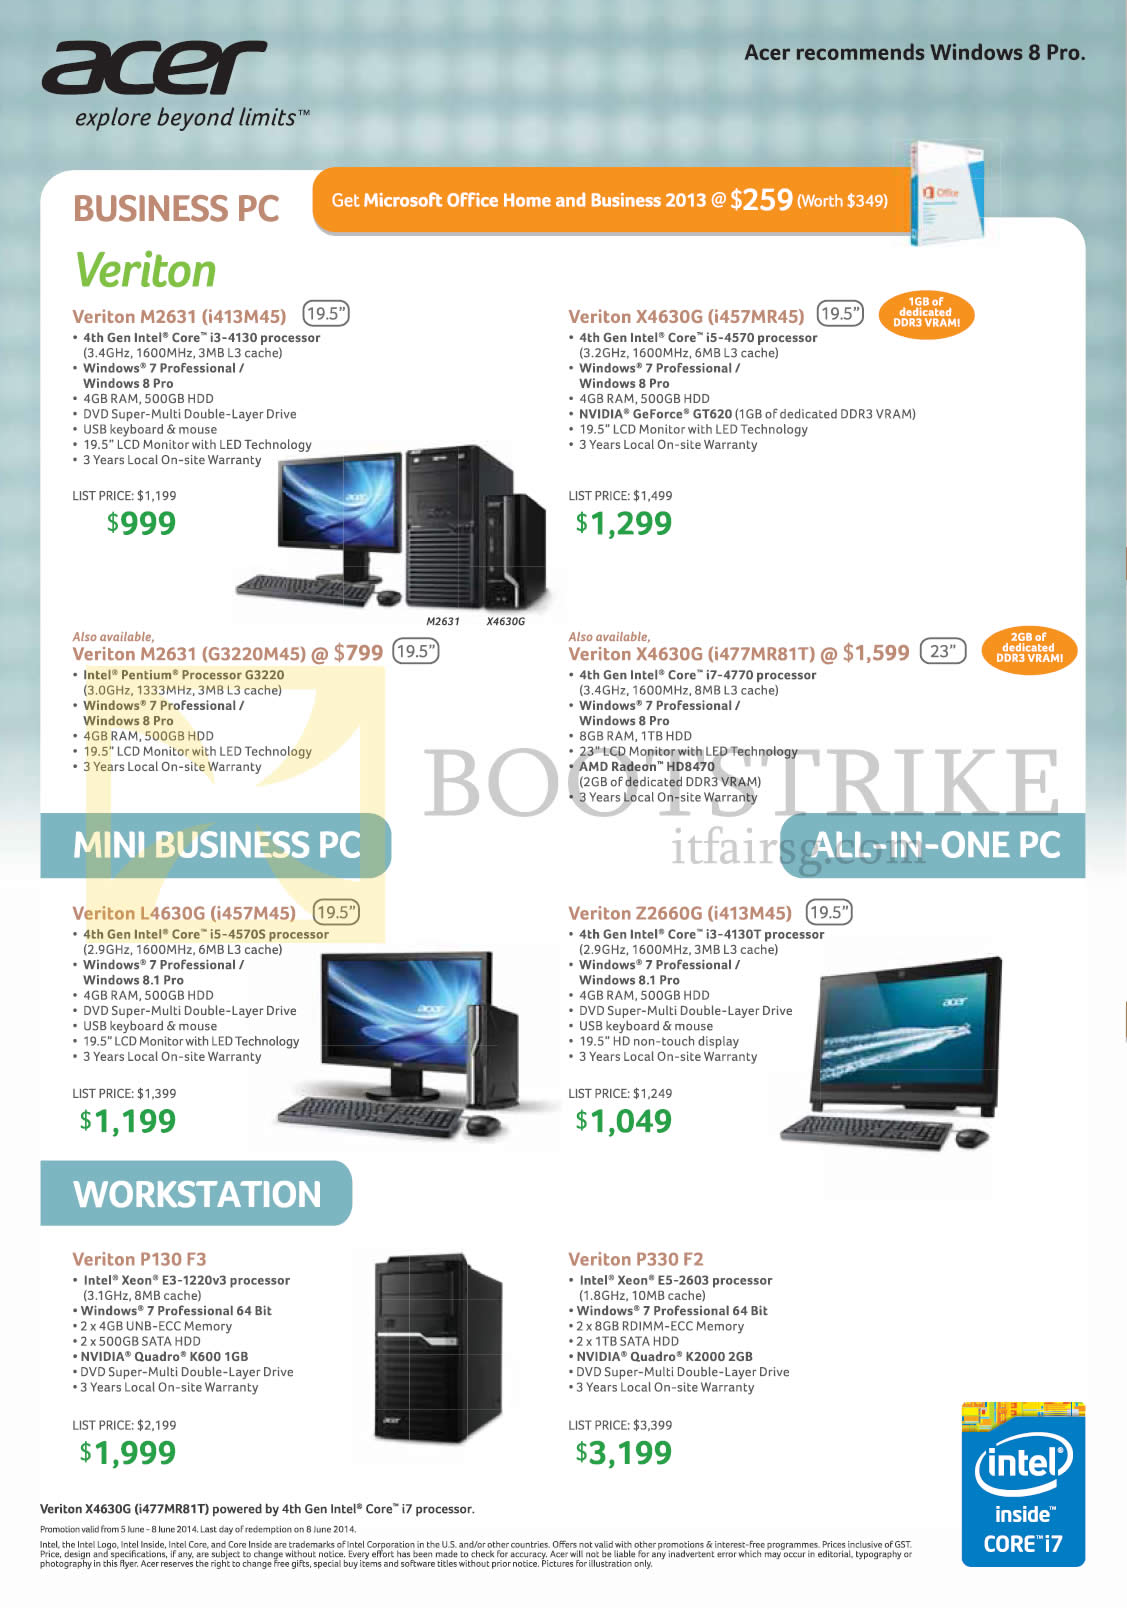 PC SHOW 2014 price list image brochure of Acer Desktop PCs, AIOs, Veriton M2631, X4630G, L4630G, Z2260G, Veriton P130 F3, P330 F2